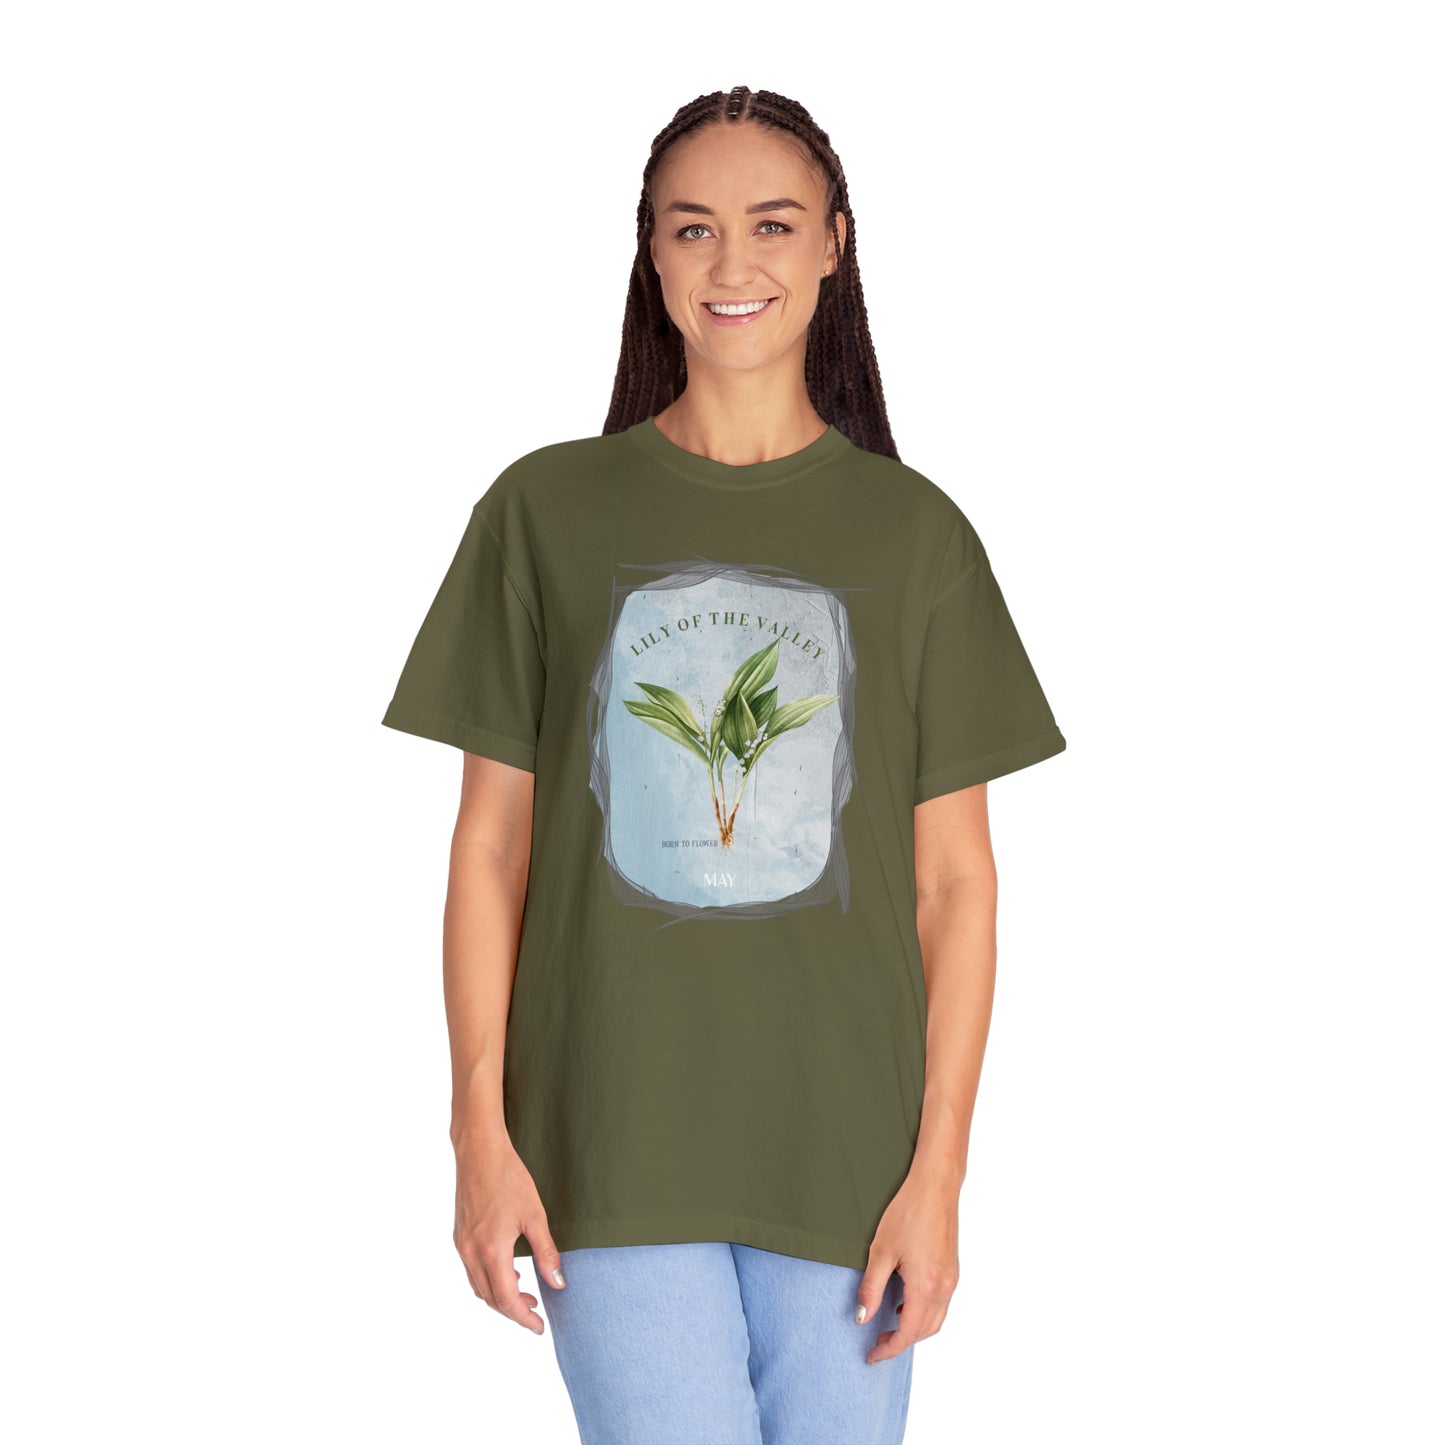 born to flower graphic tee - may